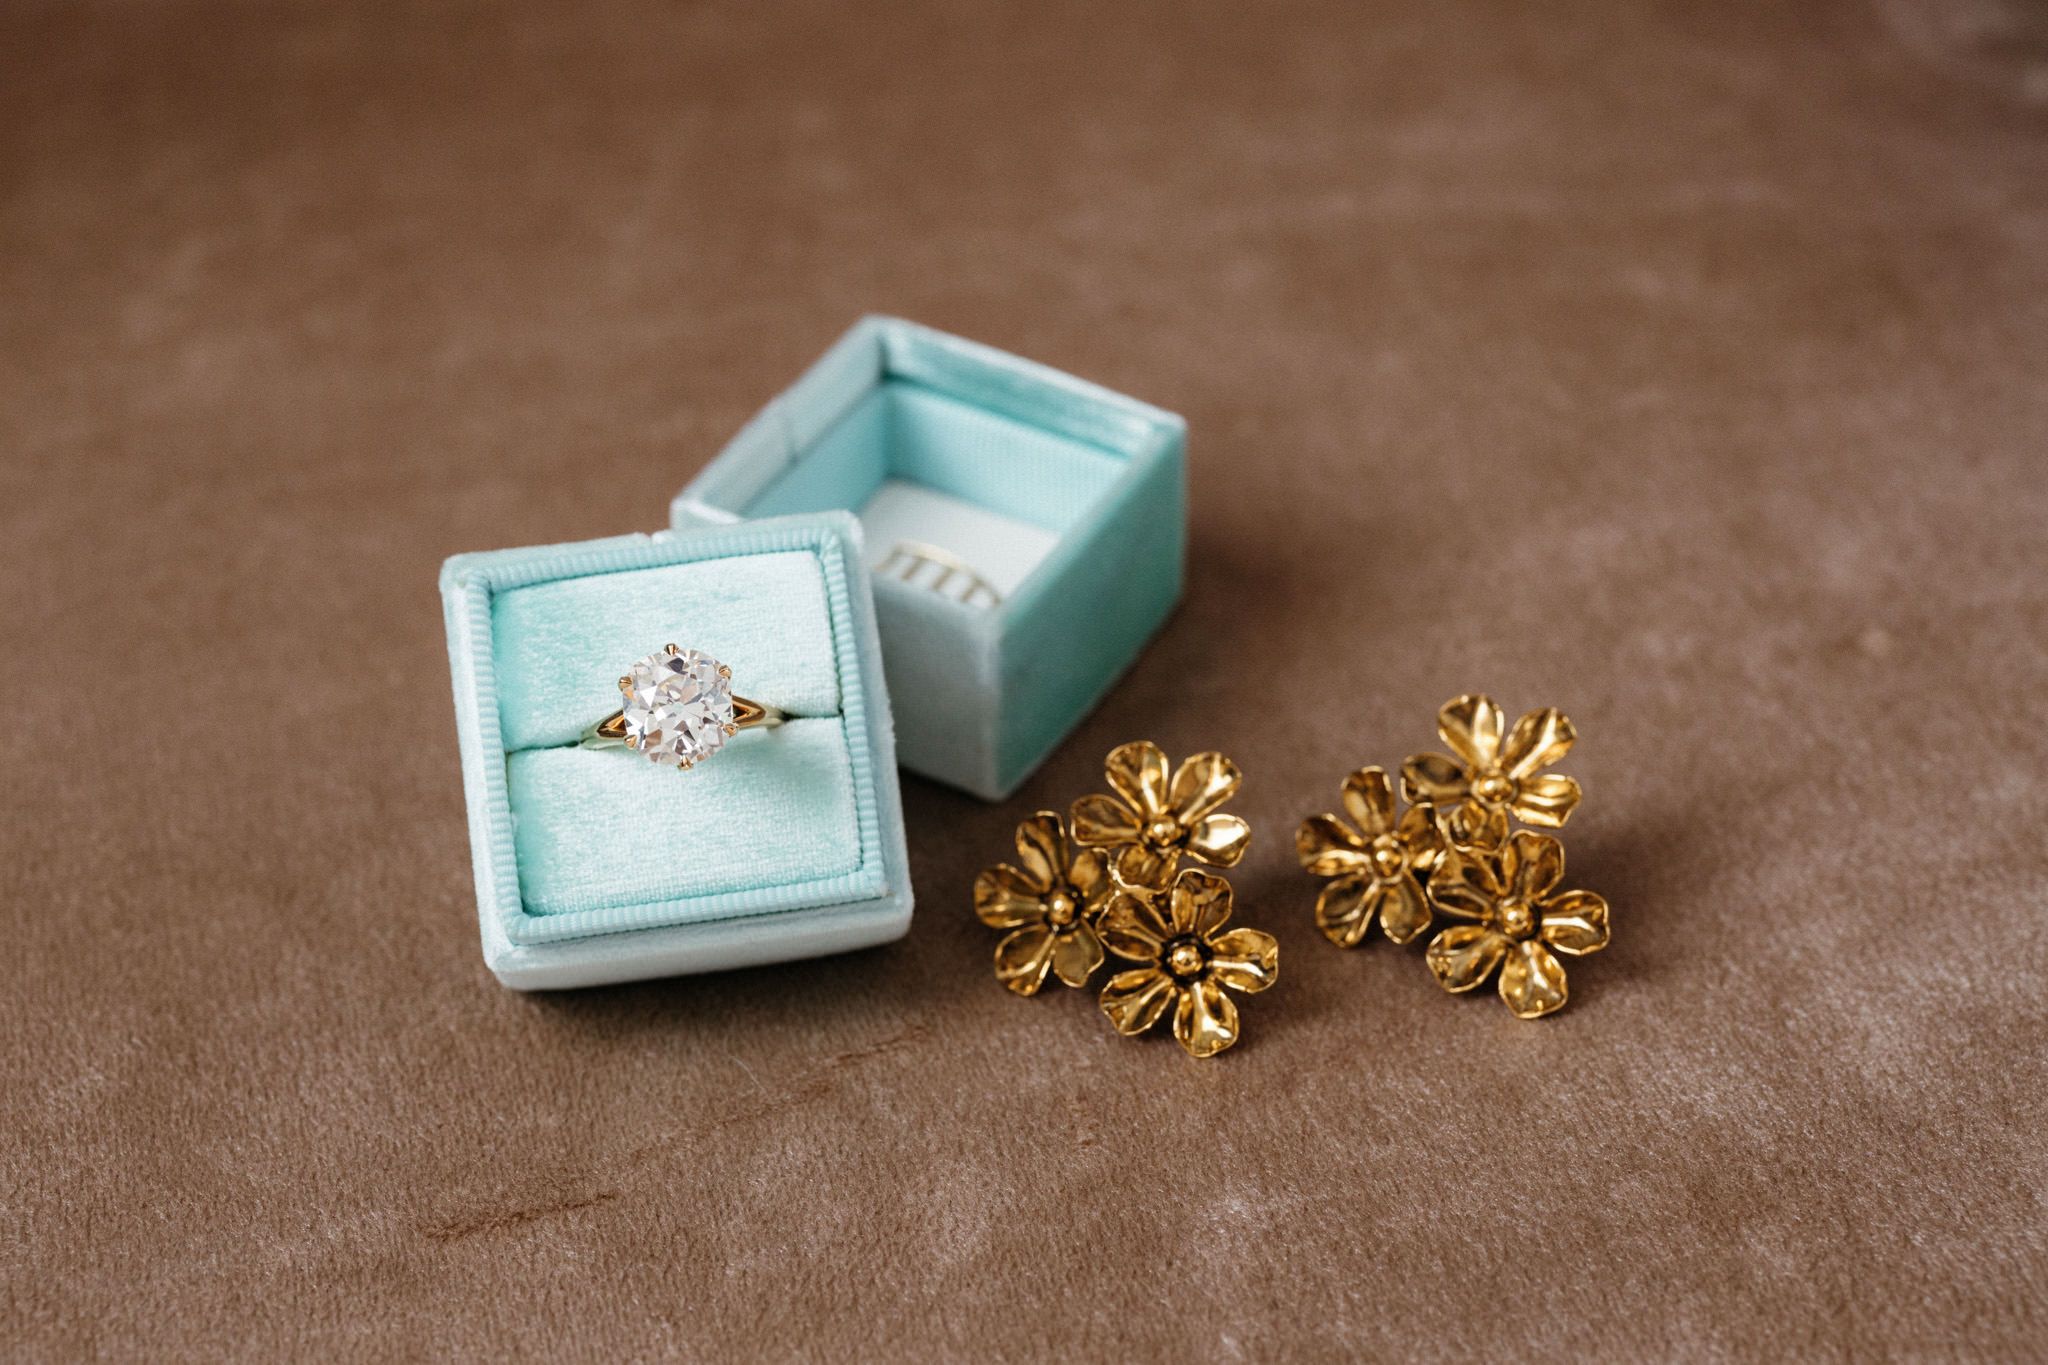 The diamond engagement ring is inside a baby blue box. Image by Jenny Fu Studio